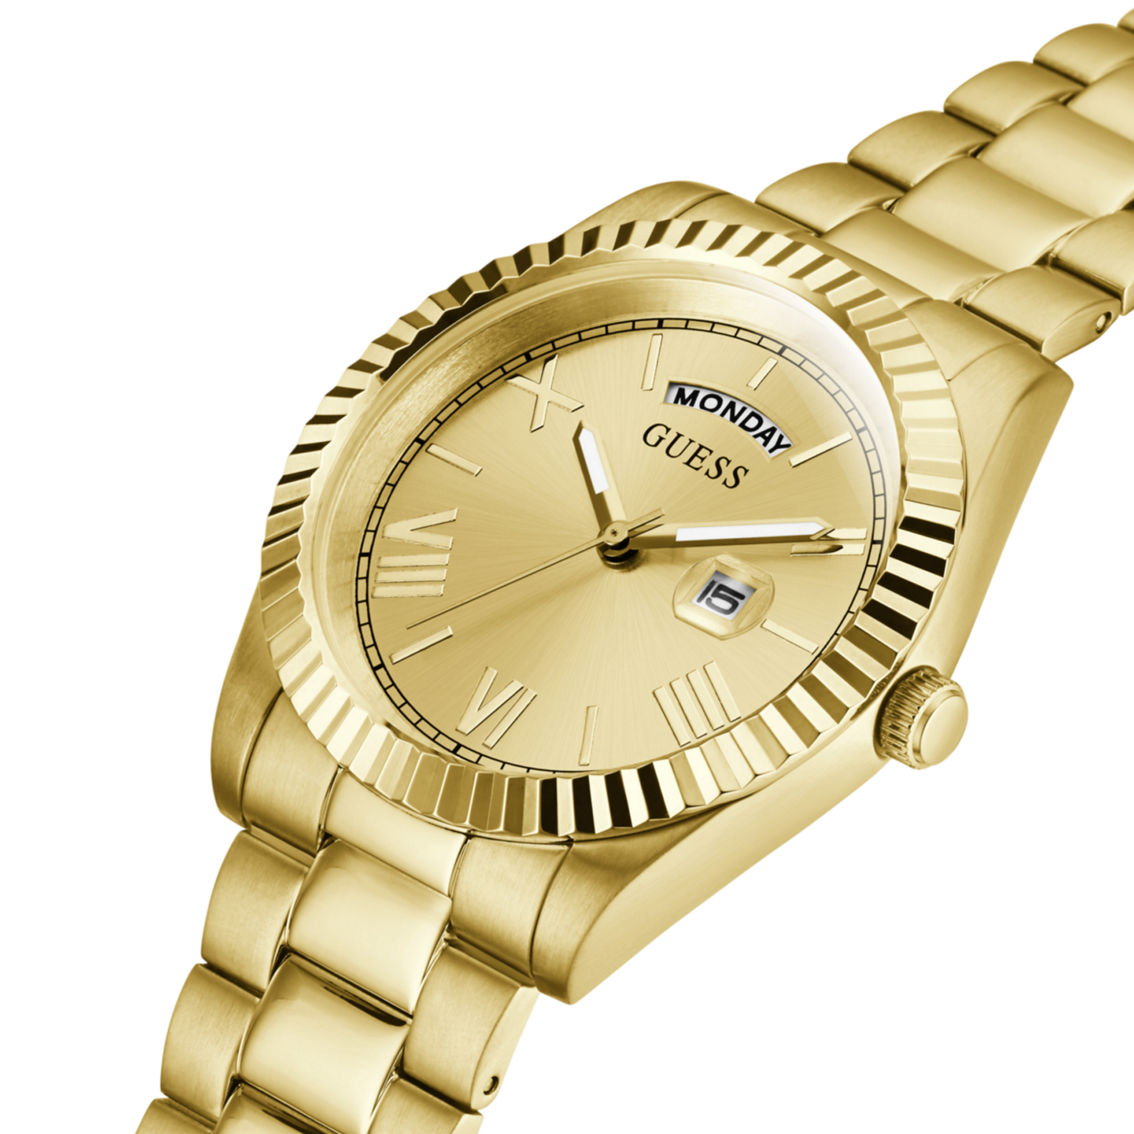 Guess Goldtone Analog Watch GW0265G2 - Image 5 of 7